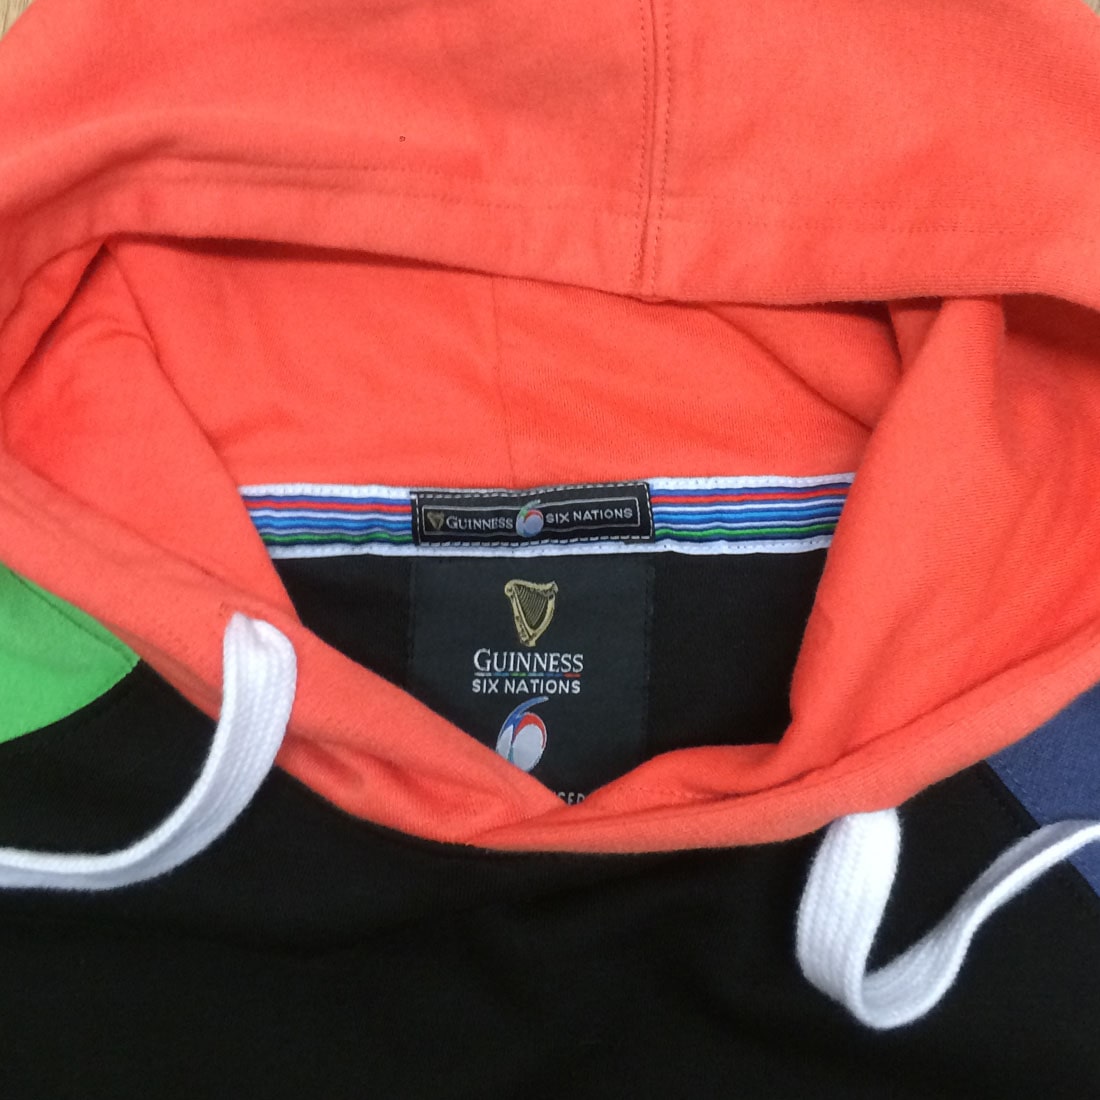 Close-up of a clothing label with the text "Guinness® Six Nations" inside the collar of an orange and black Guinness Six Nations Color Block Hoodie.